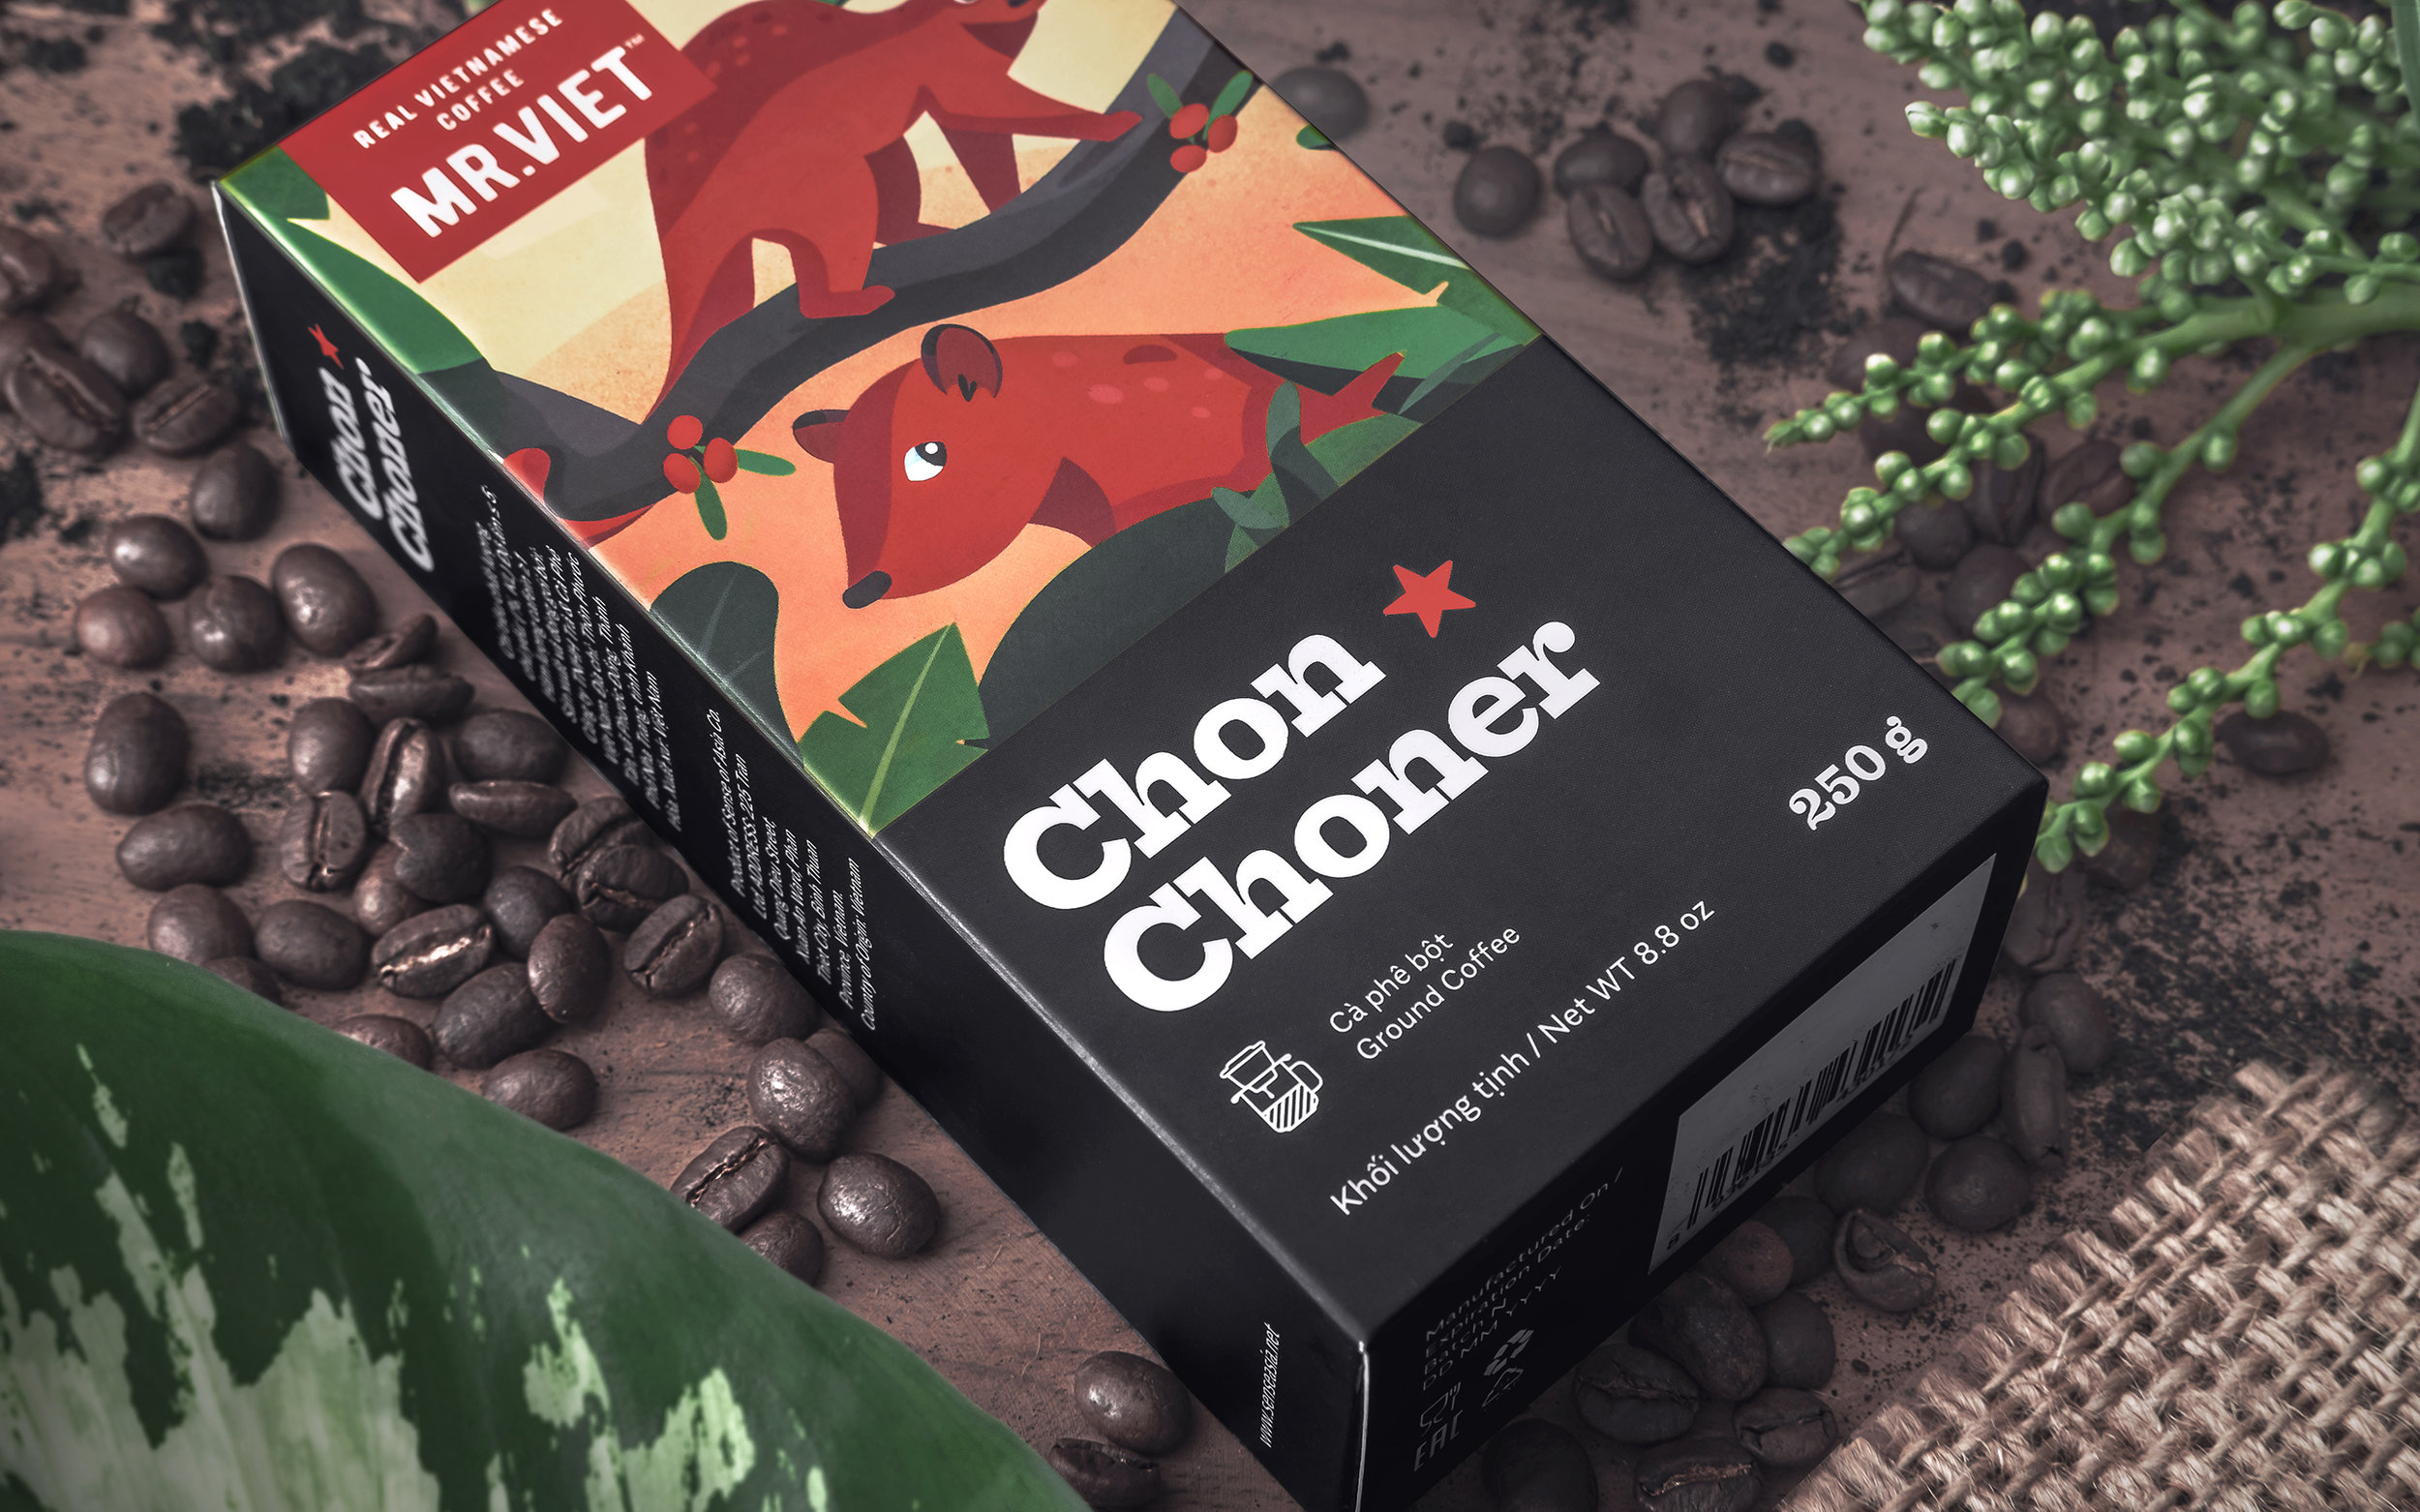 Exotic Coffee Brand and Packaging Design from Vietnam